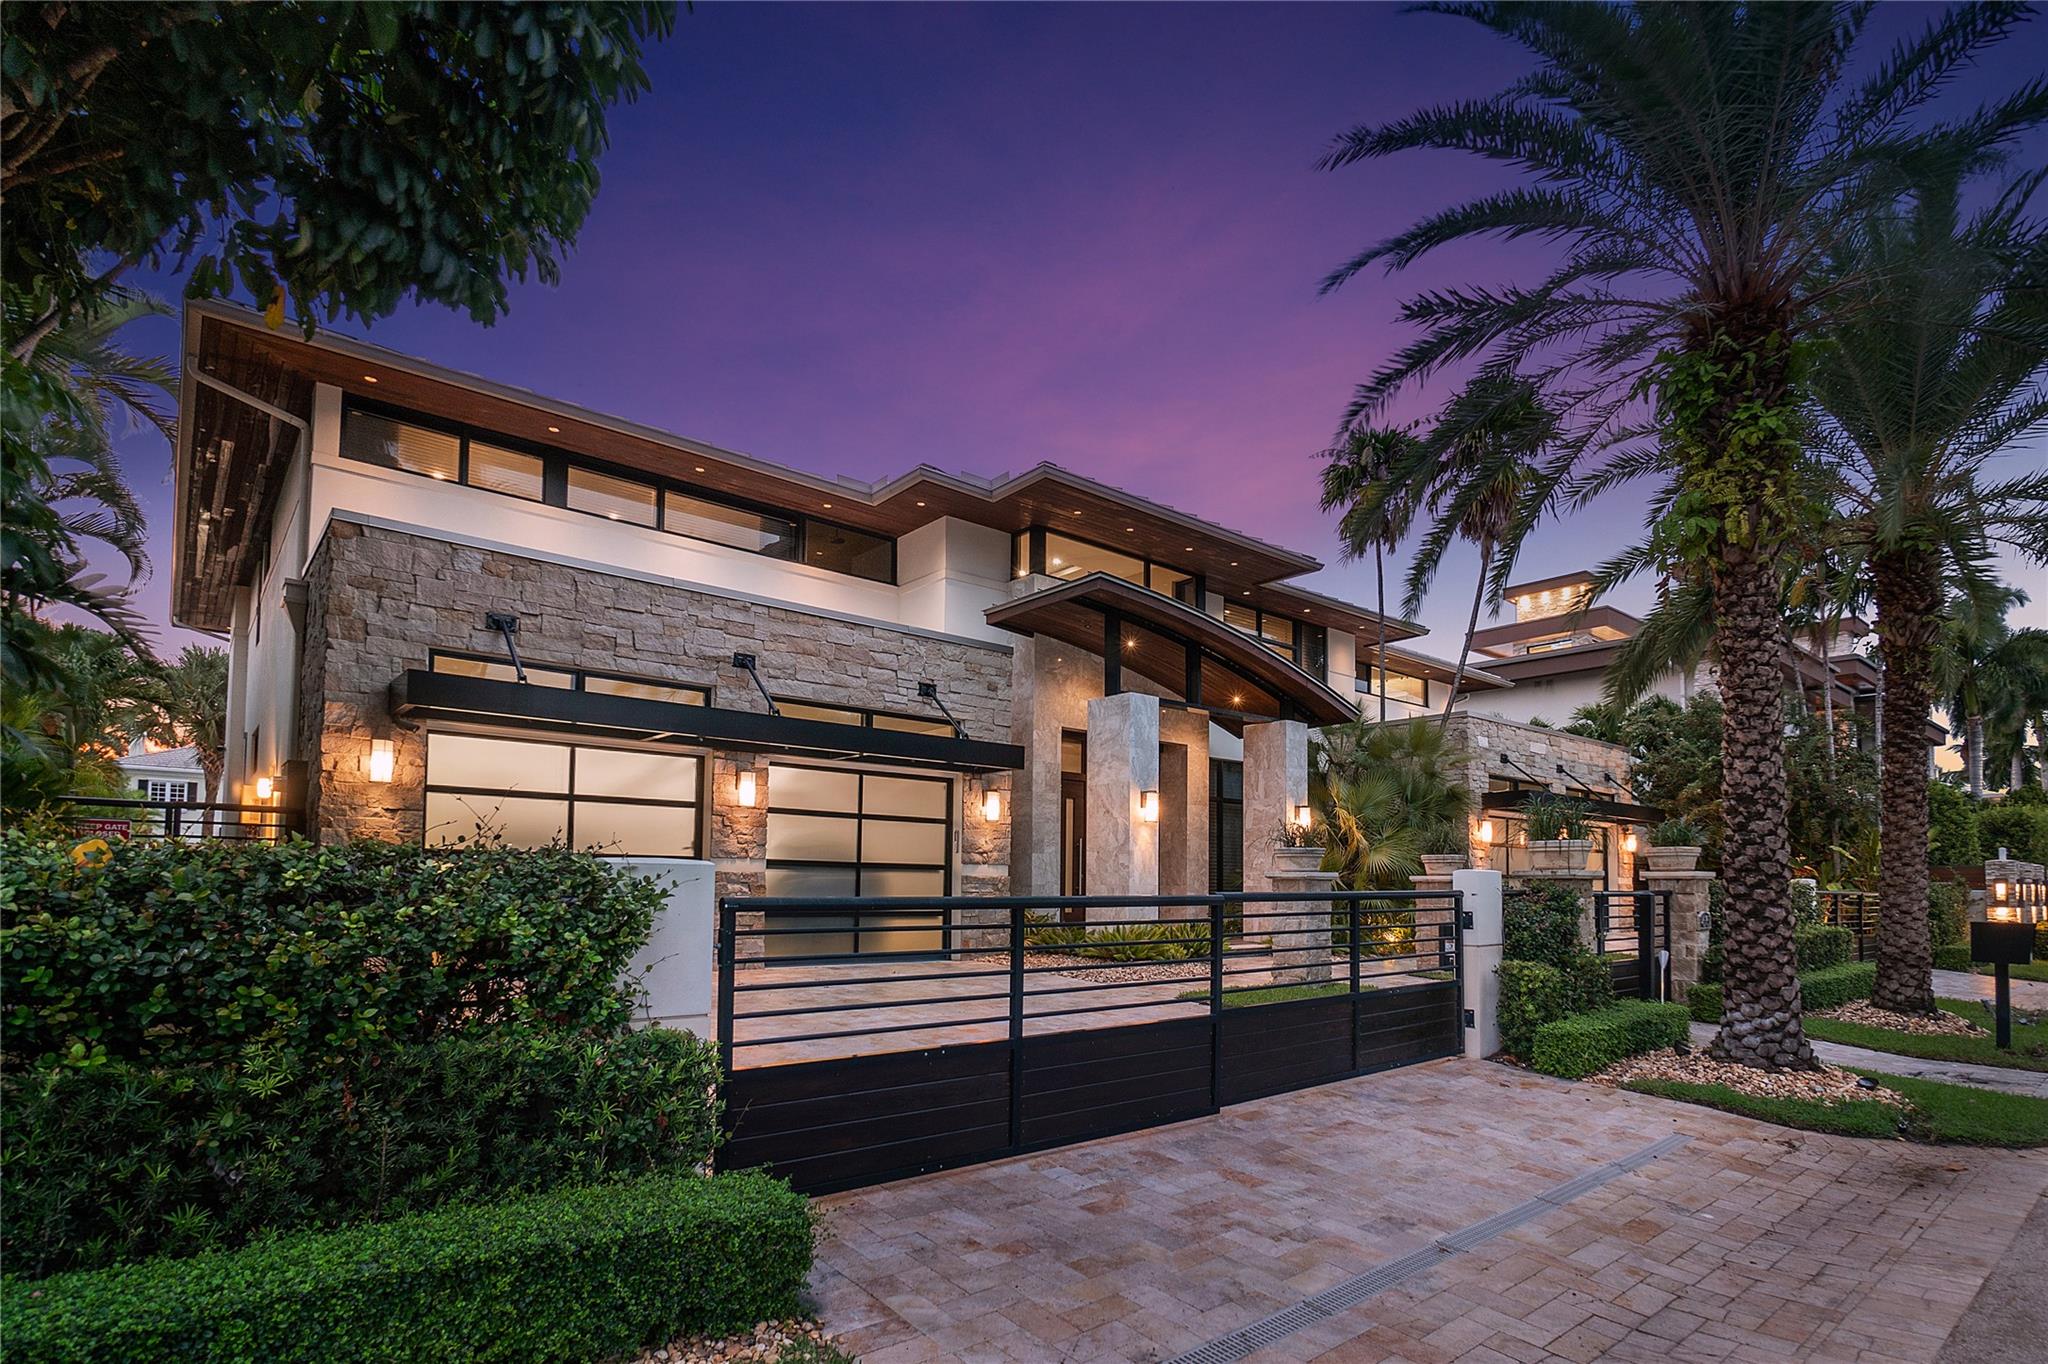 A Blend of Art & Modern Architecture Define this Sophisticated Contemporary Masterpiece. Water, Fire,Stone,Wood,Glass & Metal Elements Blend Together Creating An Unparalleled Standard Living. Highly Sought After South Side of Las Olas Isles on 100ft of Premium Deep Draft Waterfront. Quick Ocean Access w/ No Fixed Bridges. Generous Floor Plan w/ Living & Dining Space Perfect for Indoor & Outdoor Entrainment. Fireplace, Bar & Glass Enclosed Wine Cellar. Resort Style Pool, Office, Generous Sized Bedrooms, In-Law Suite, Huge primary Baths & Closet. Control 4 Home Automation System, 16 Cameras, 4 Car Garage w/ 2 electric charges, Automated Mosquito Control Sysytem,Gated & Secured. Minutes to Fort Lauderdale Airport, World Famous Fort Lauderdale Beach and Las Olas Isles Shopping and Restaurants.